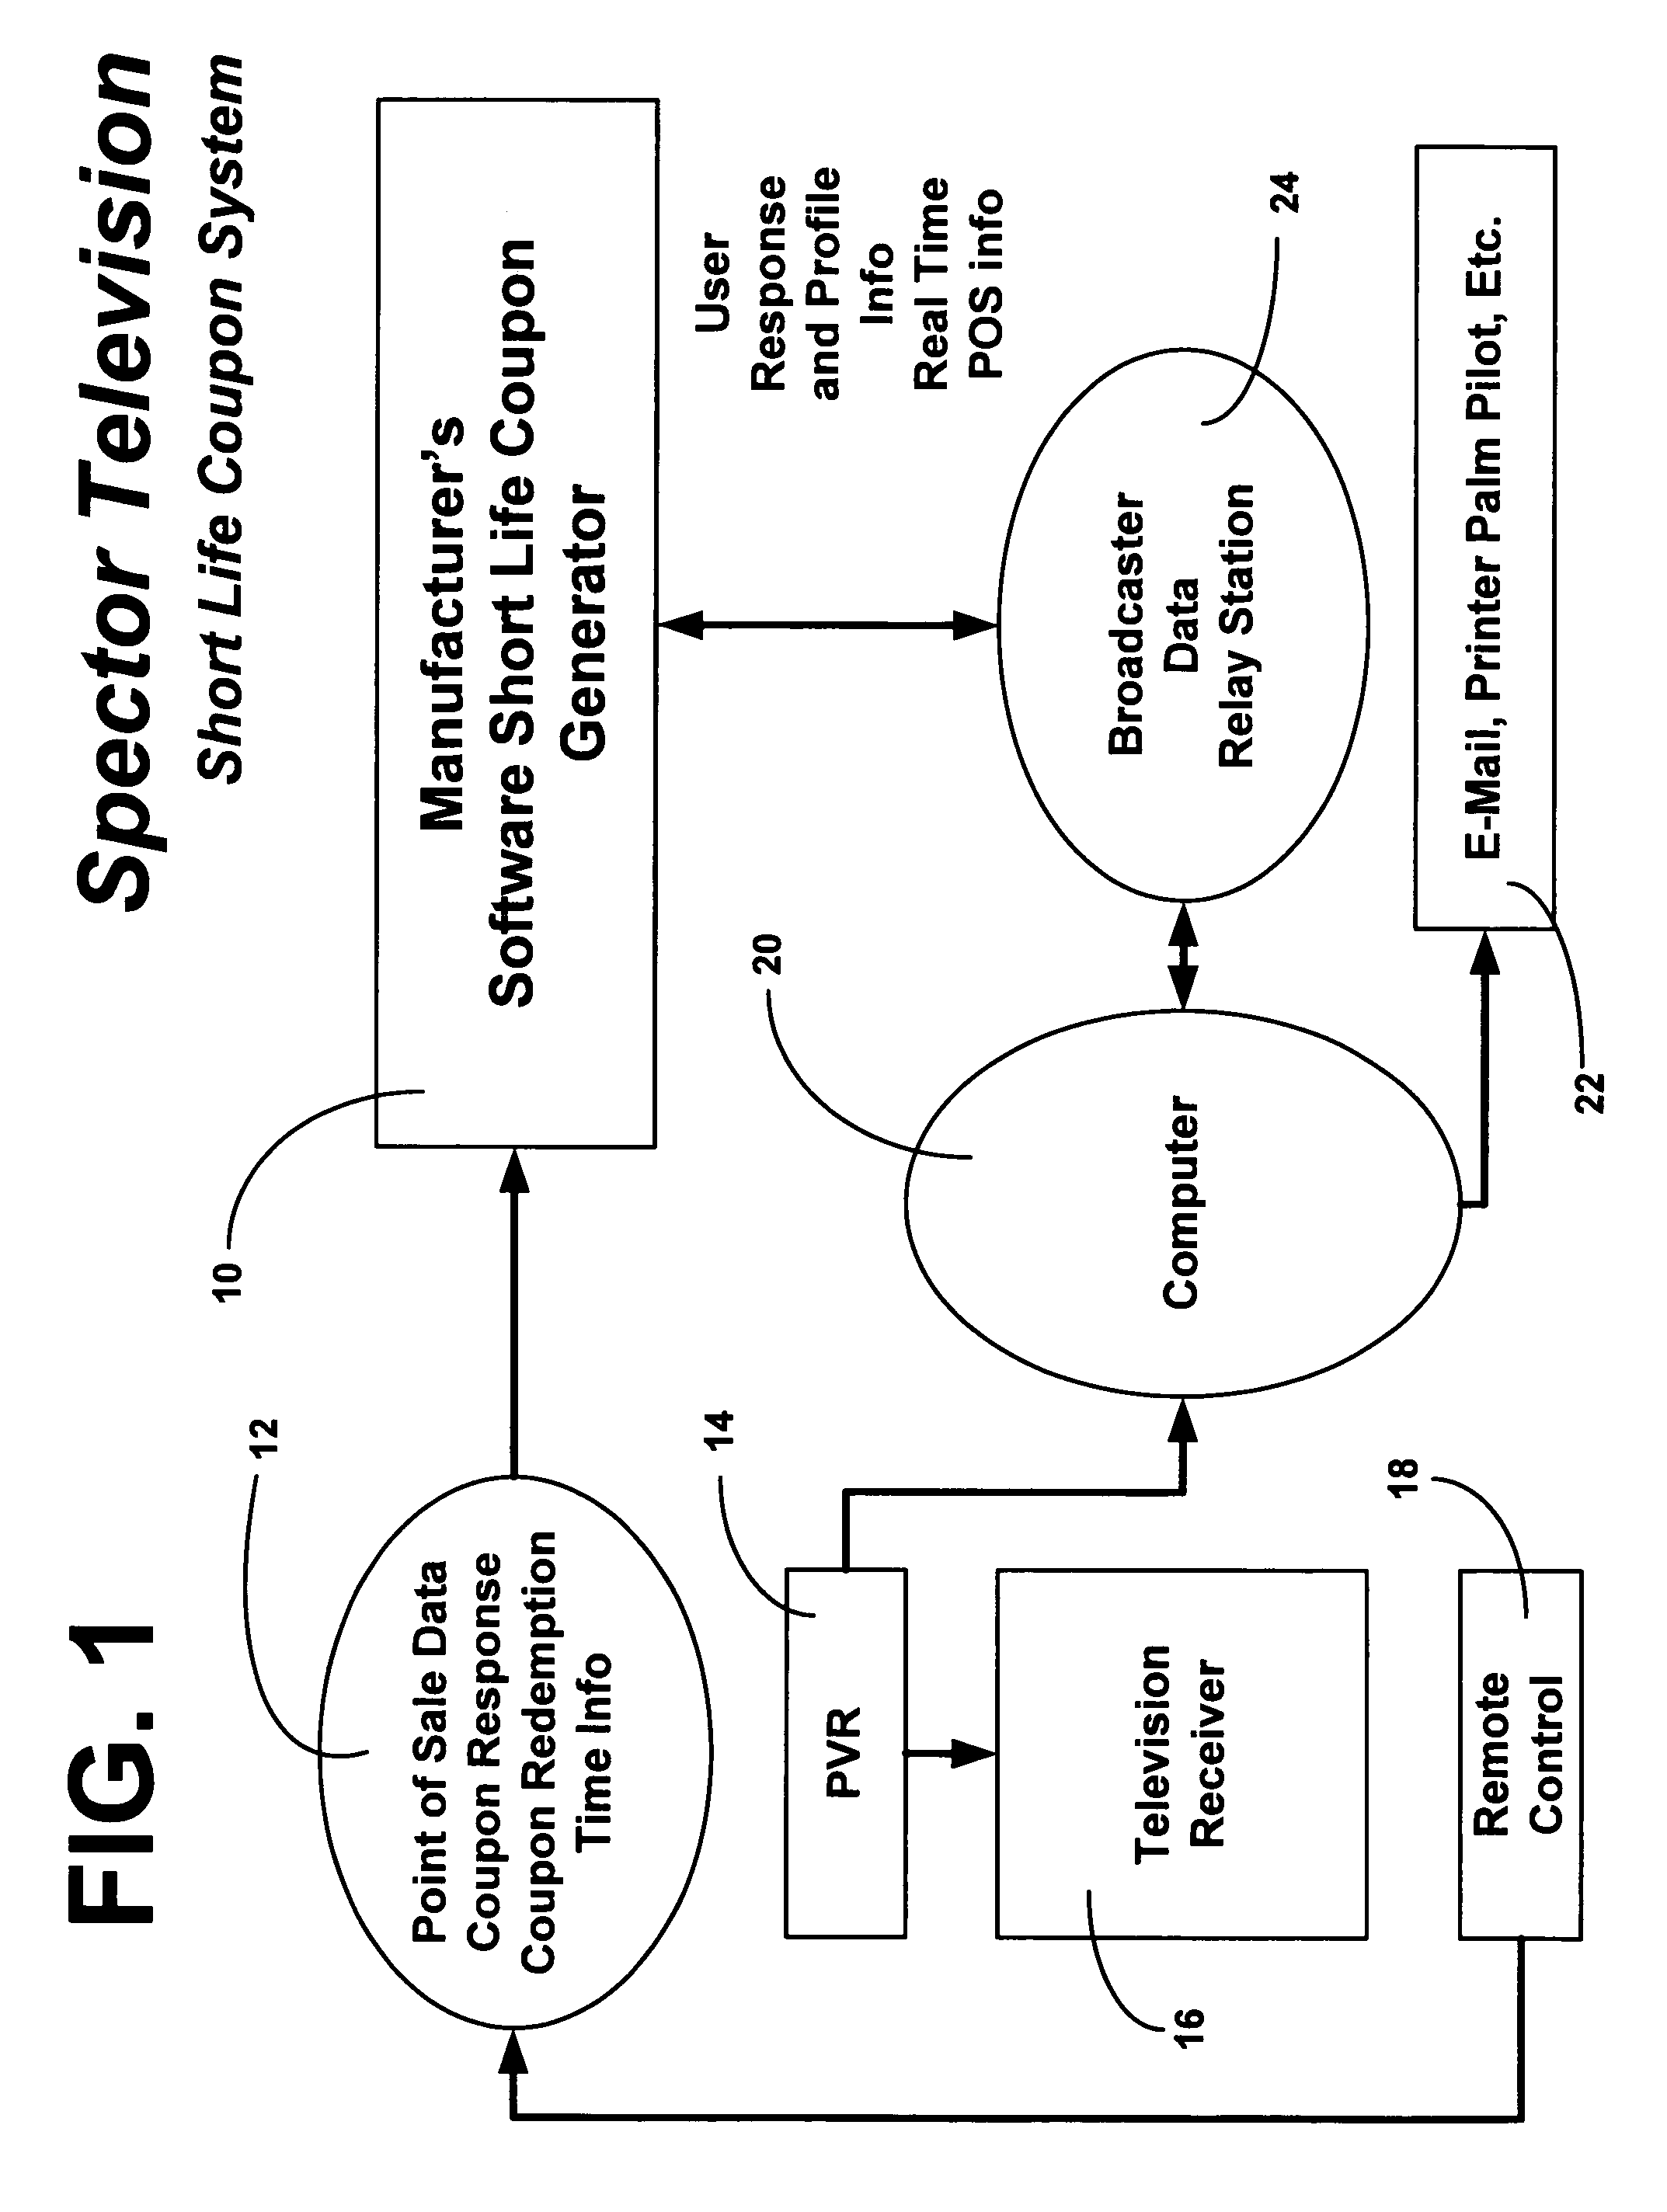 System for issuing short life coupons or other promotional devices